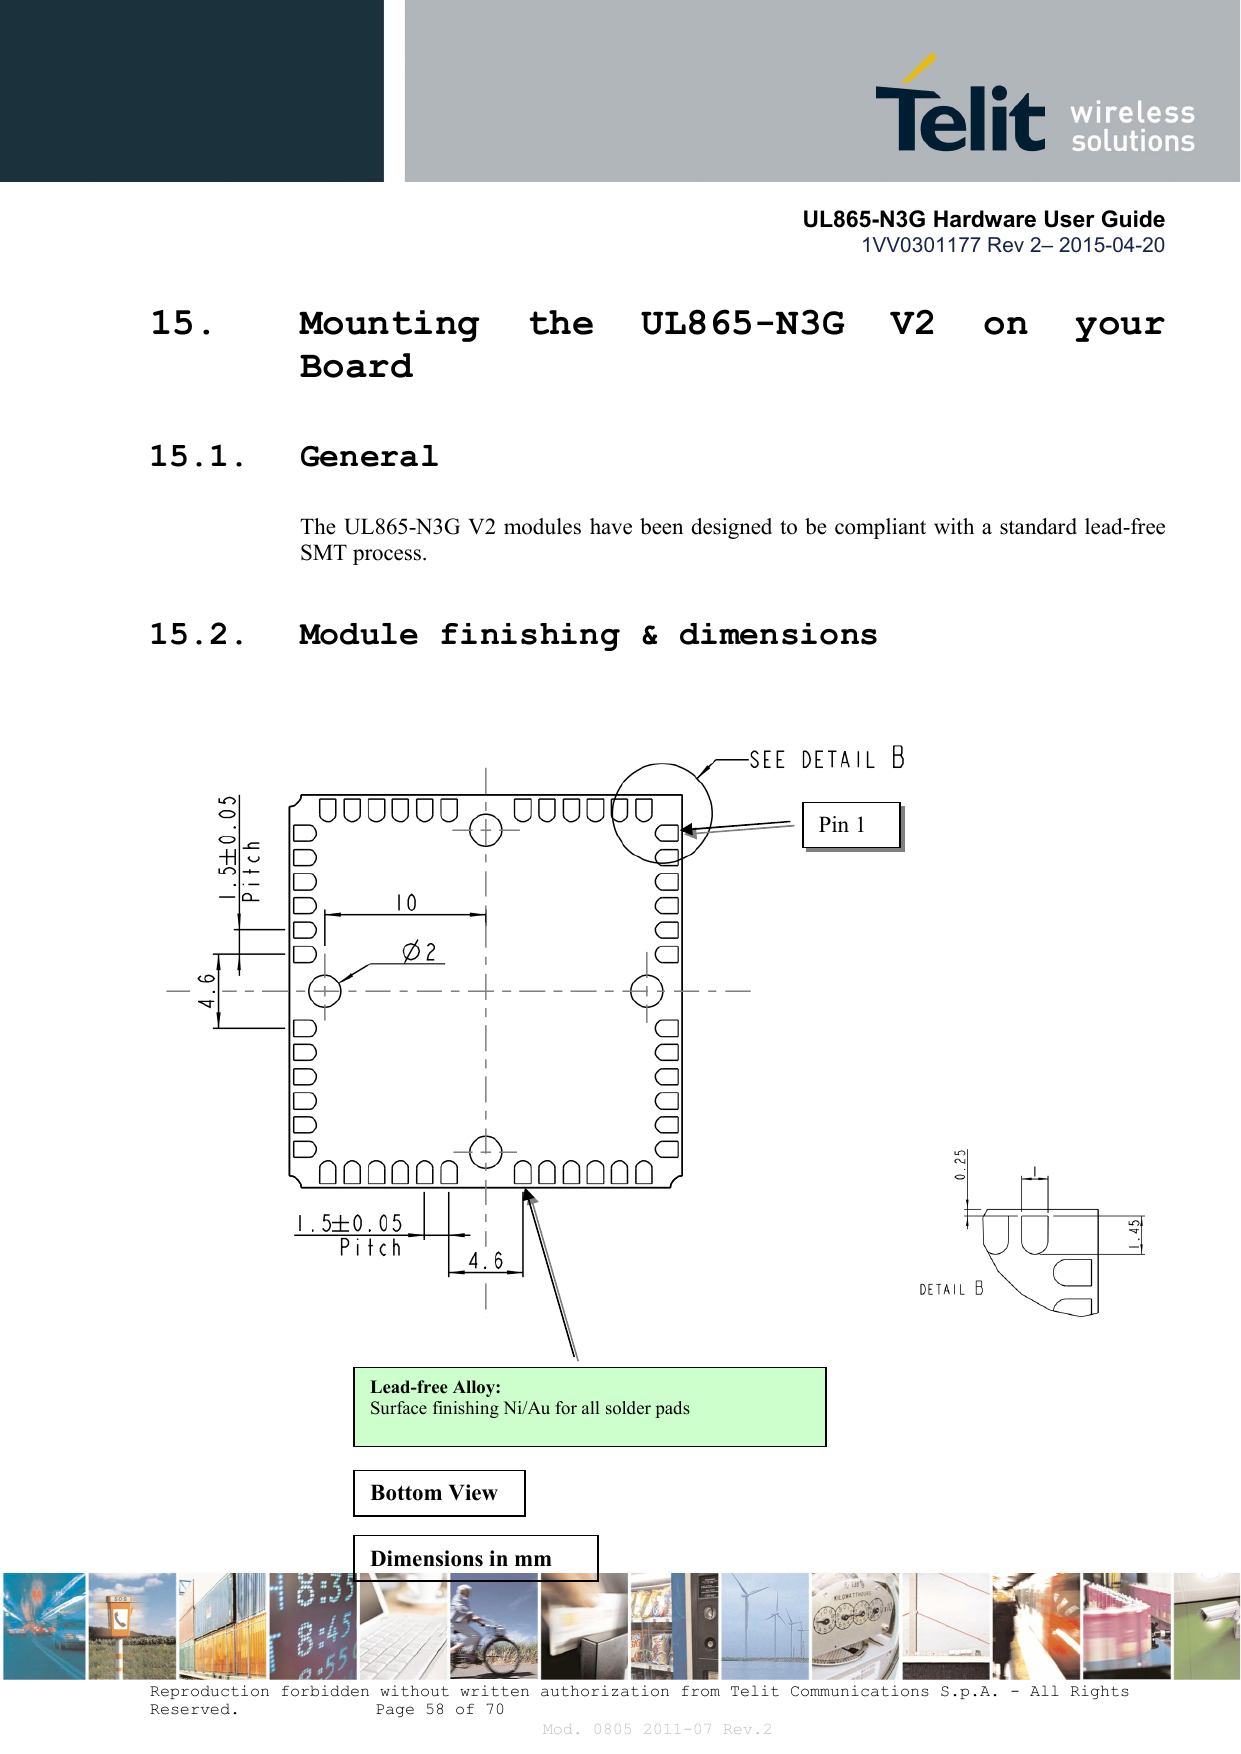       UL865-N3G Hardware User Guide 1VV0301177 Rev 2– 2015-04-20  Reproduction forbidden without written authorization from Telit Communications S.p.A. - All Rights Reserved.    Page 58 of 70 Mod. 0805 2011-07 Rev.2 15. Mounting  the  UL865-N3G  V2  on  your Board 15.1. General The UL865-N3G V2 modules have been designed to be compliant with a standard lead-free SMT process. 15.2. Module finishing &amp; dimensions  Pin 1 Lead-free Alloy: Surface finishing Ni/Au for all solder pads Bottom View Dimensions in mm 